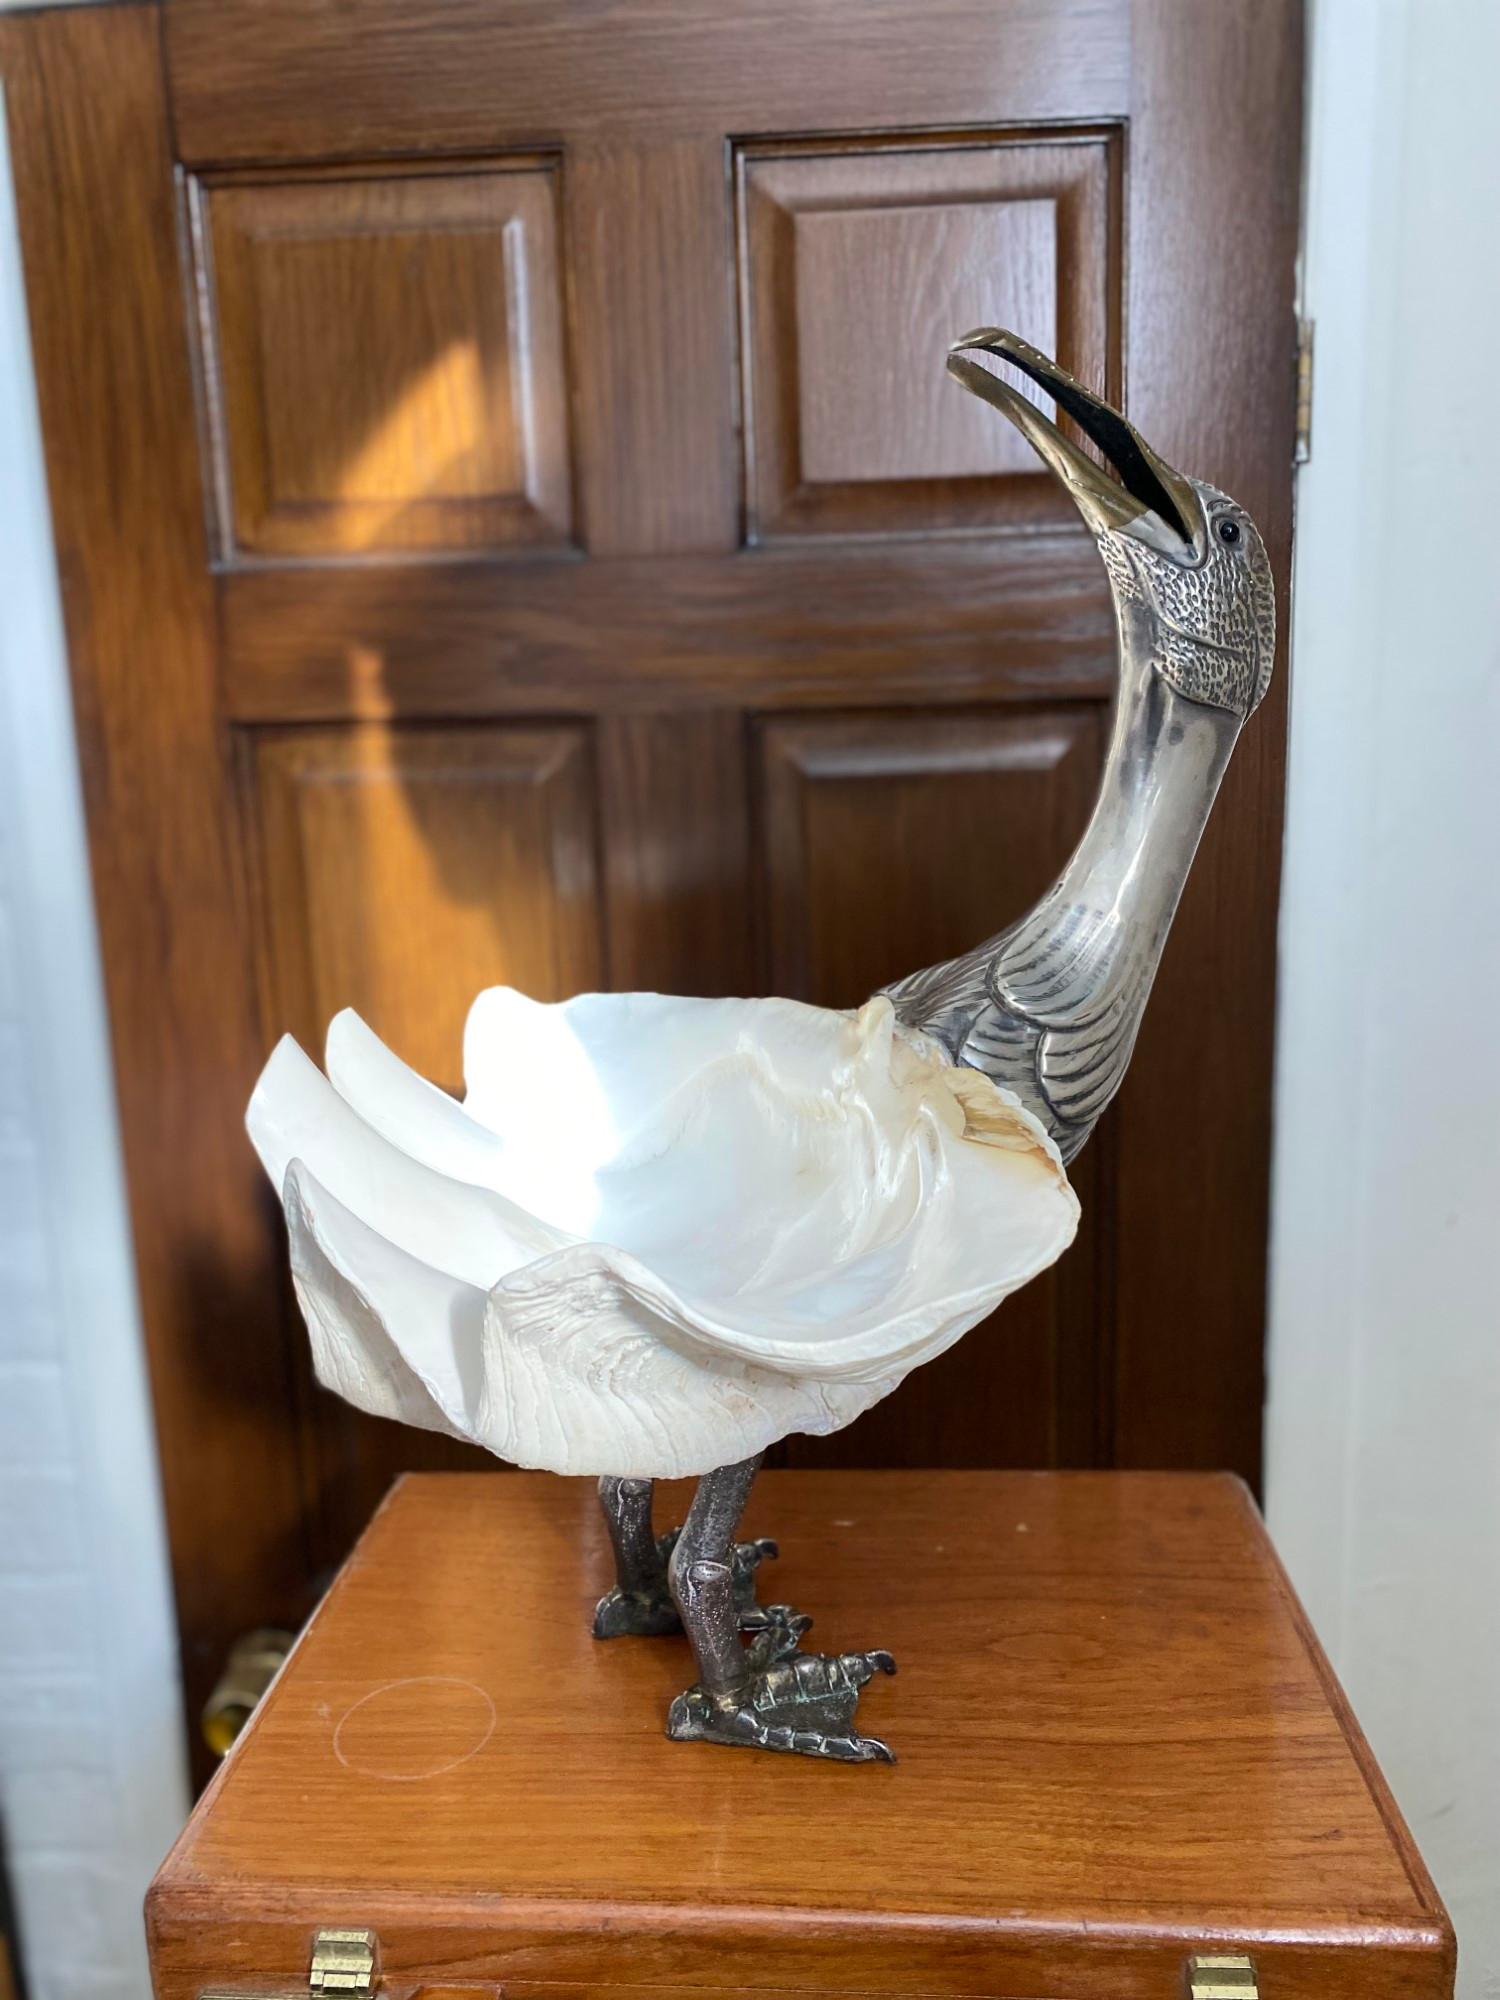 20th Century Midcentury Bird Sculpture by Gabriella Binazzi with Giant Clam Shell, Italian